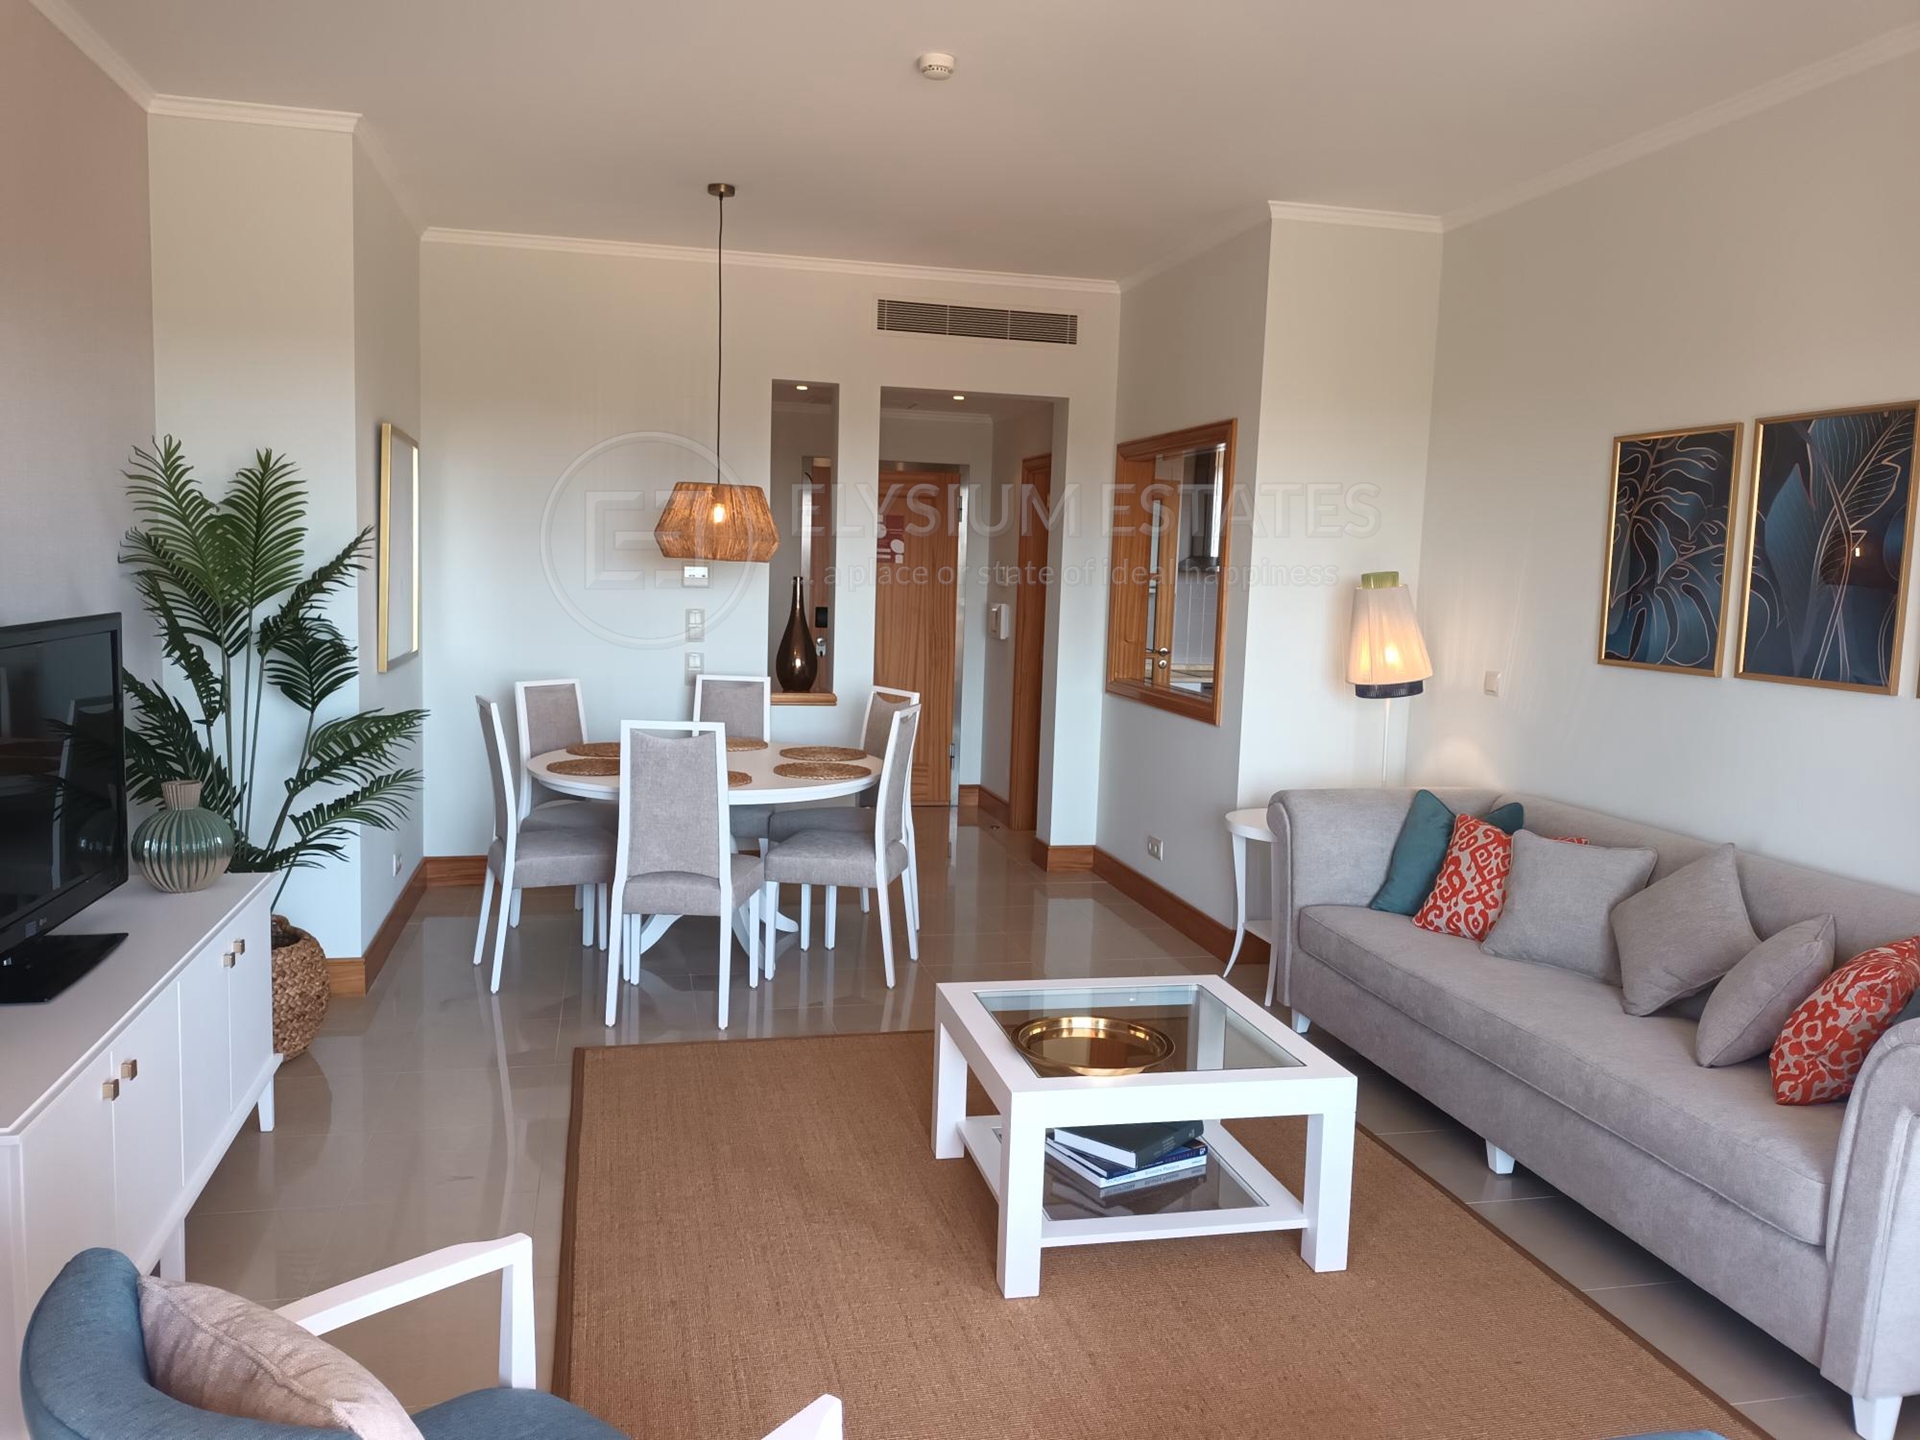 A0767 - 3 Bedroom Apartment on Golf Course Vilamoura